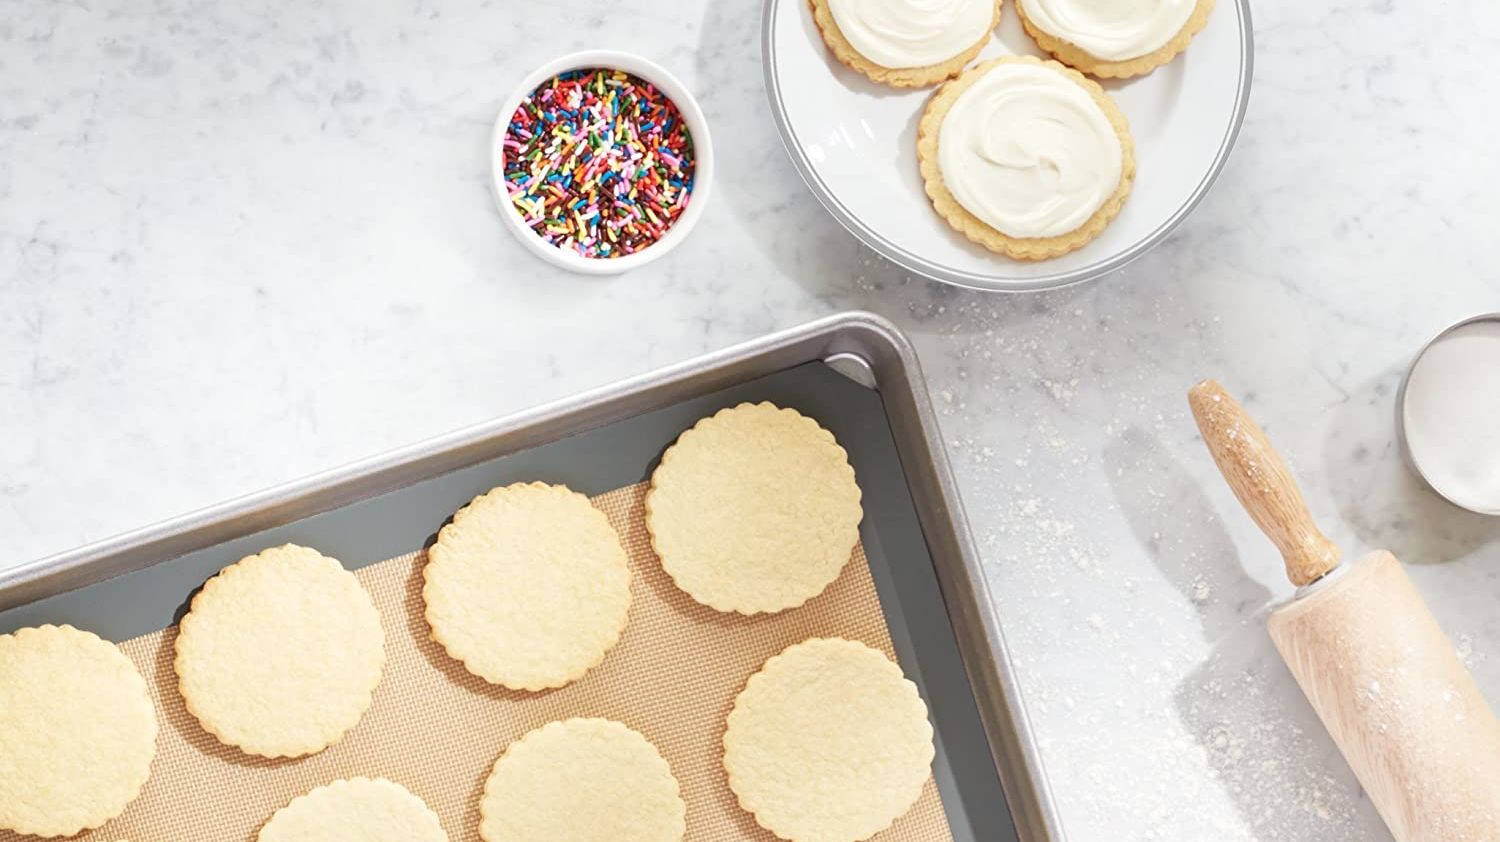 17 Things You Need to Become a Home Baker